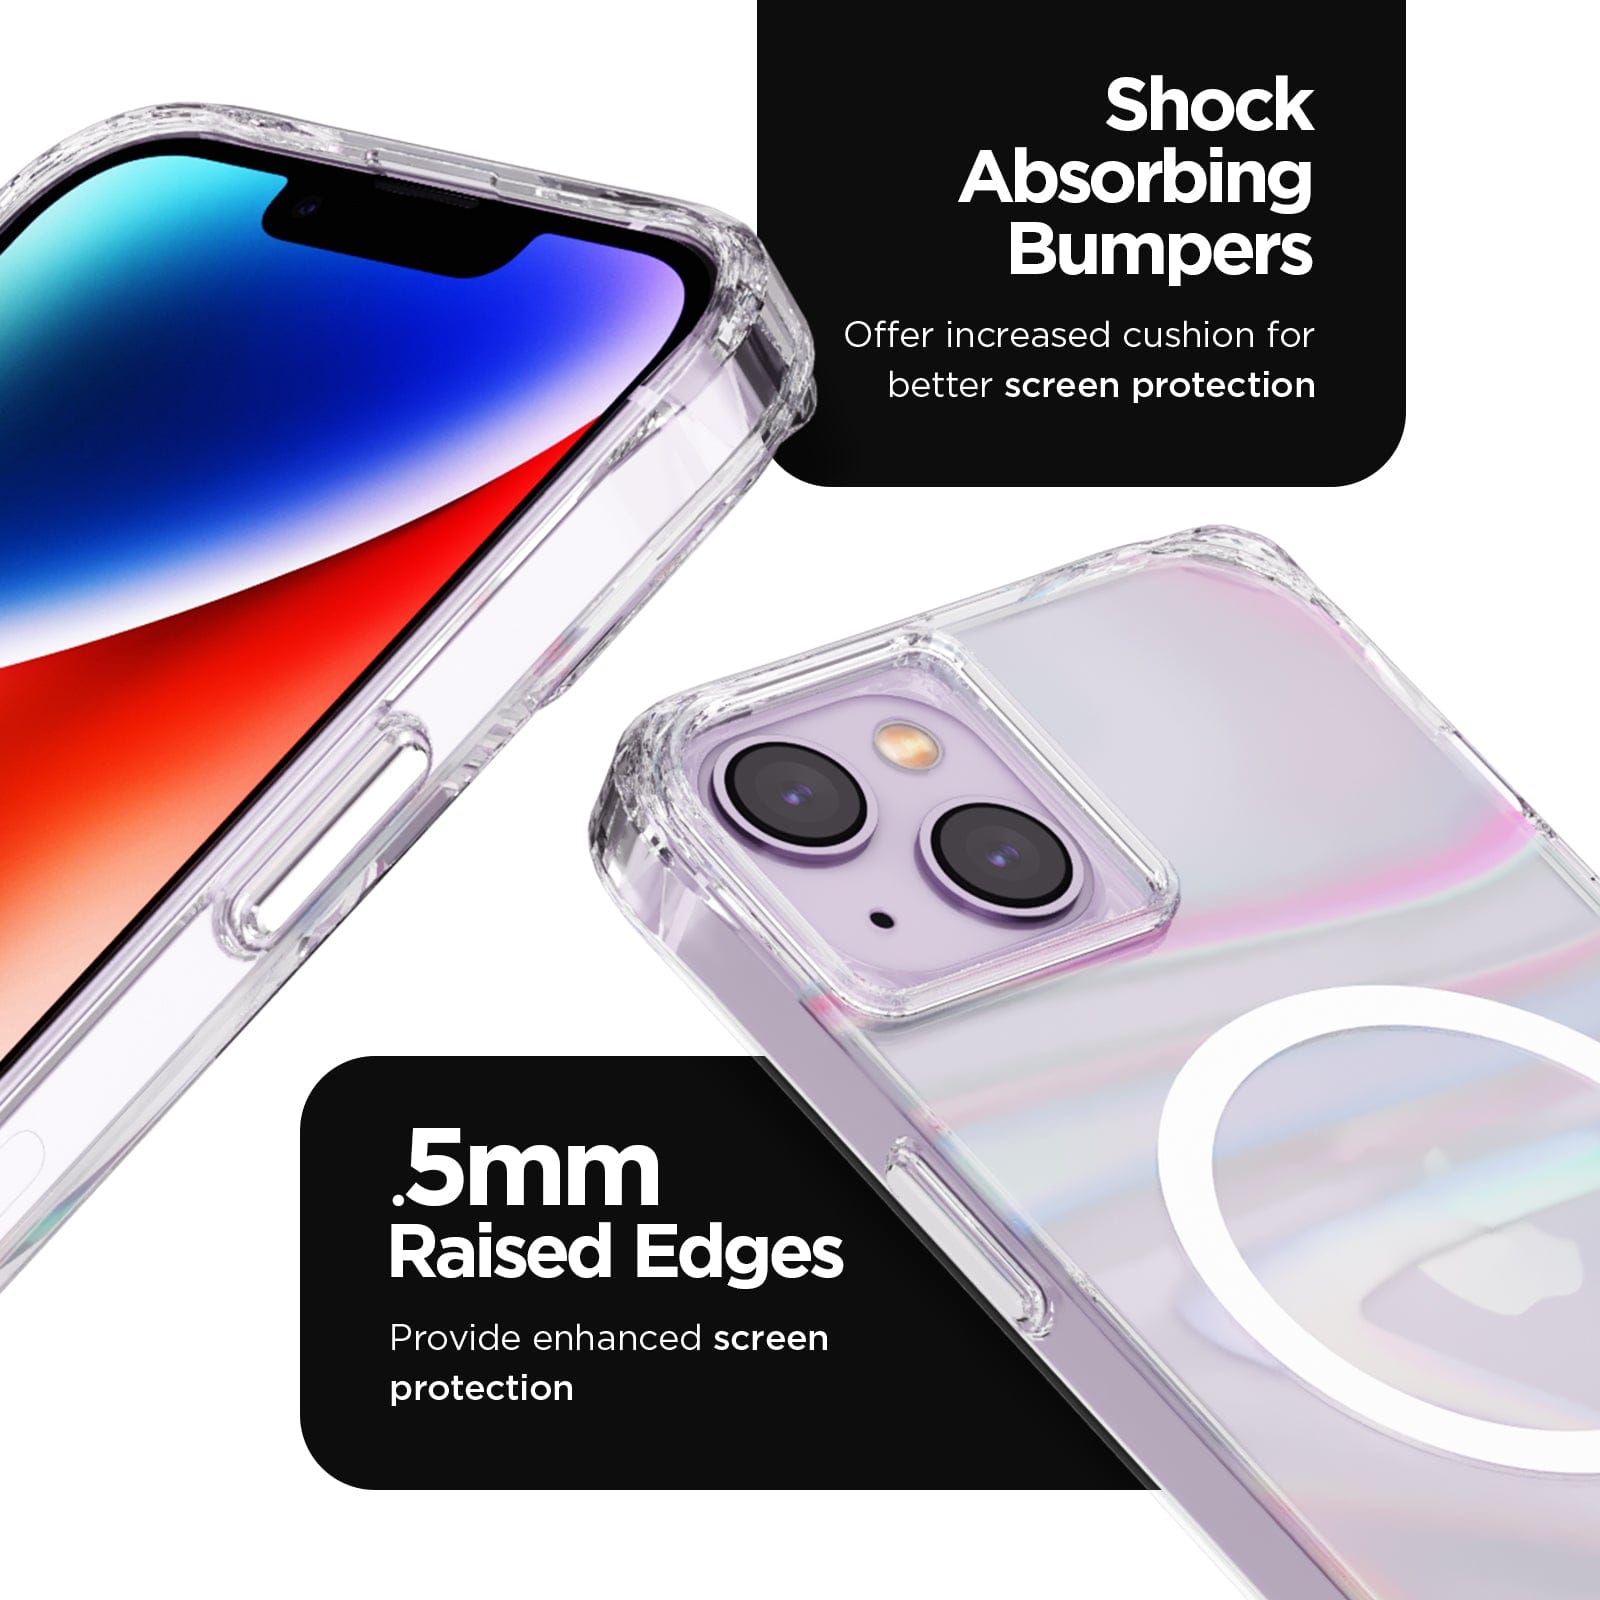 SHOCK ABSORBING BUMPERS. OFFER INCREASED CUSHION FOR BETTER SCREEN PROTECTION. .5MM RAISED EDGES PROVIDE ENHANCED SCREEN PROTECTION.